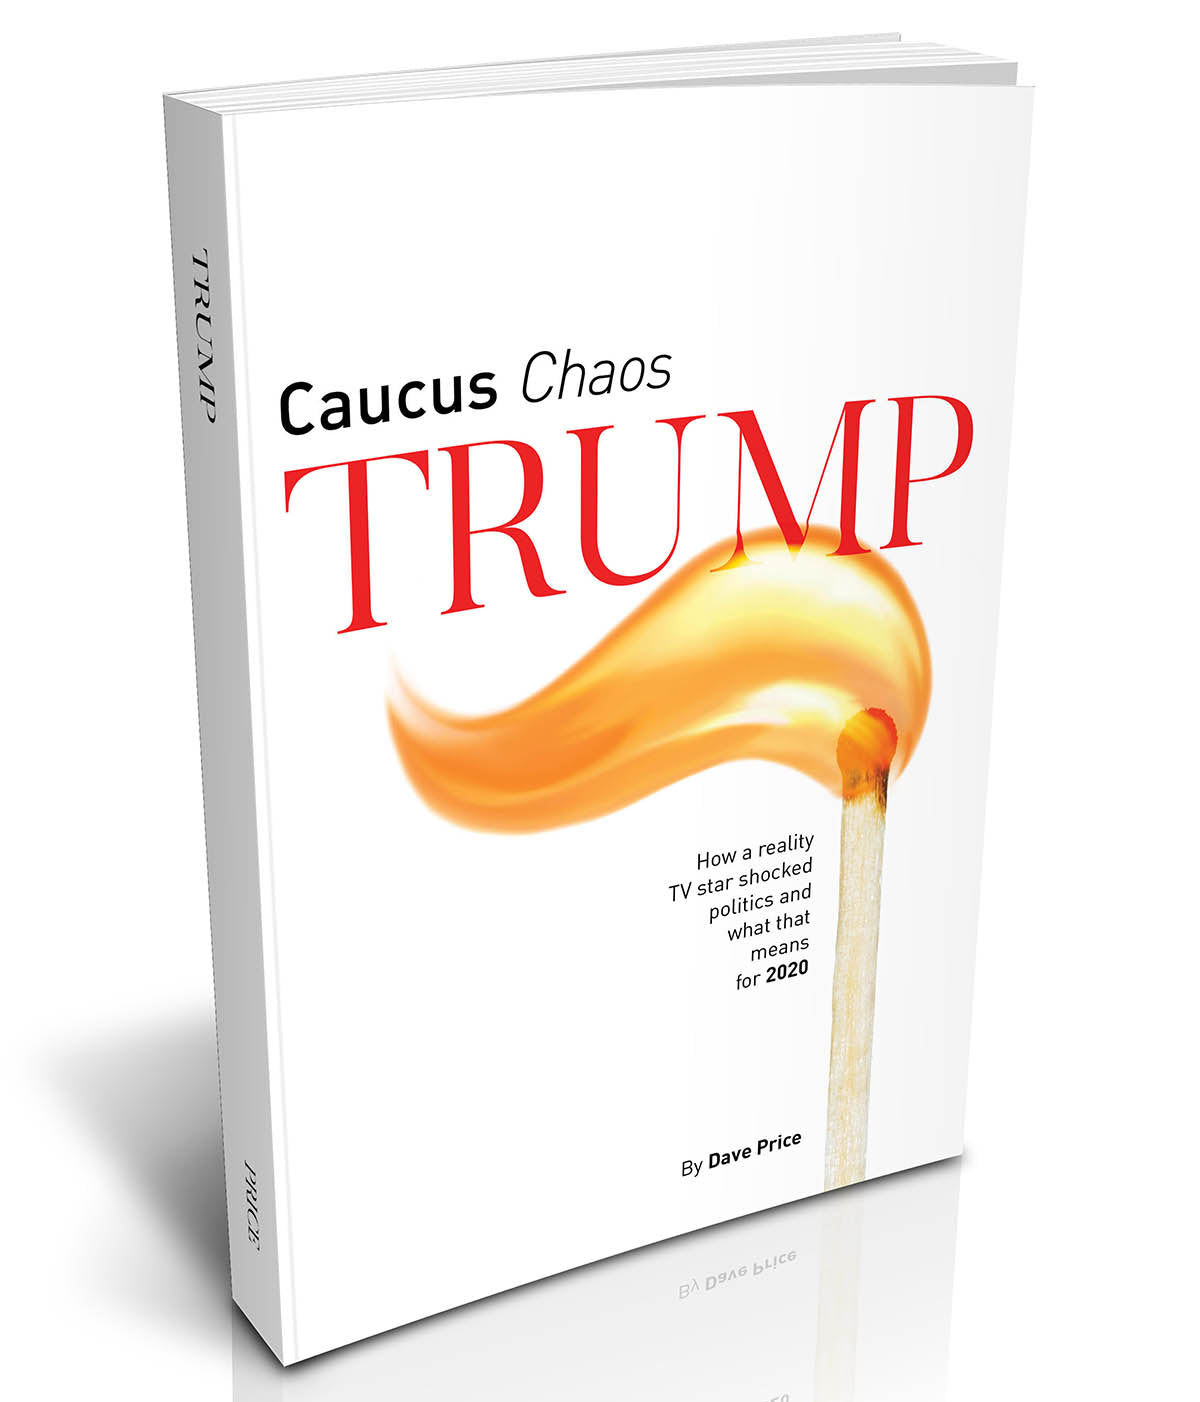 Iowa Nice: Receive One Signed Caucus Chaos Trump and Get Another Copy Free to Give to Someone Else